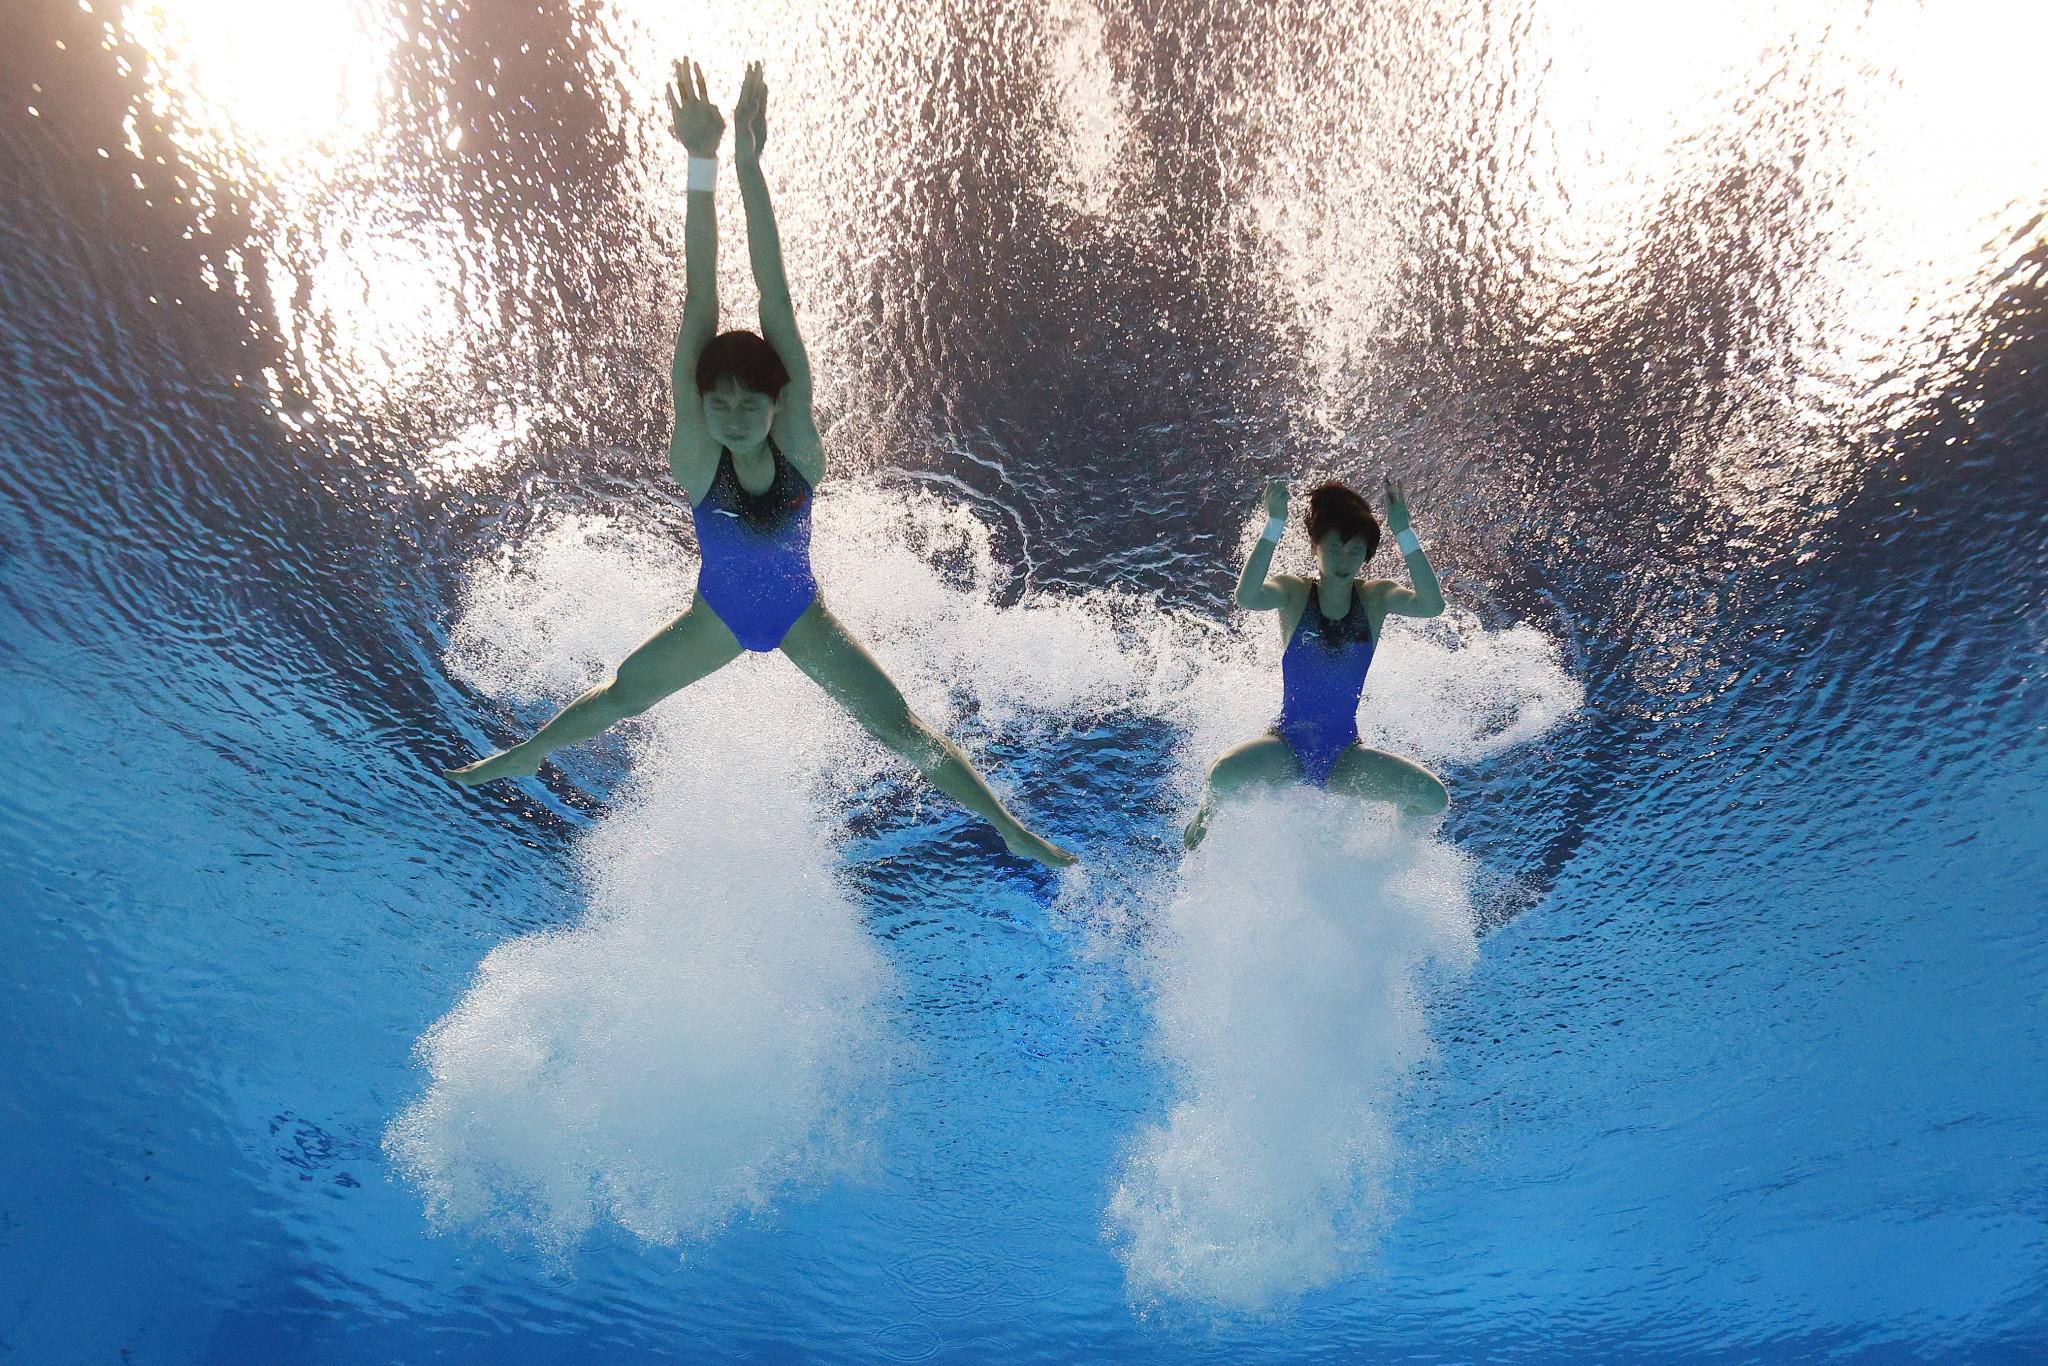 Chen Yuxi and Quan Hongchan triumphed for China in the women's 10m platform synchronised final ©Getty Images